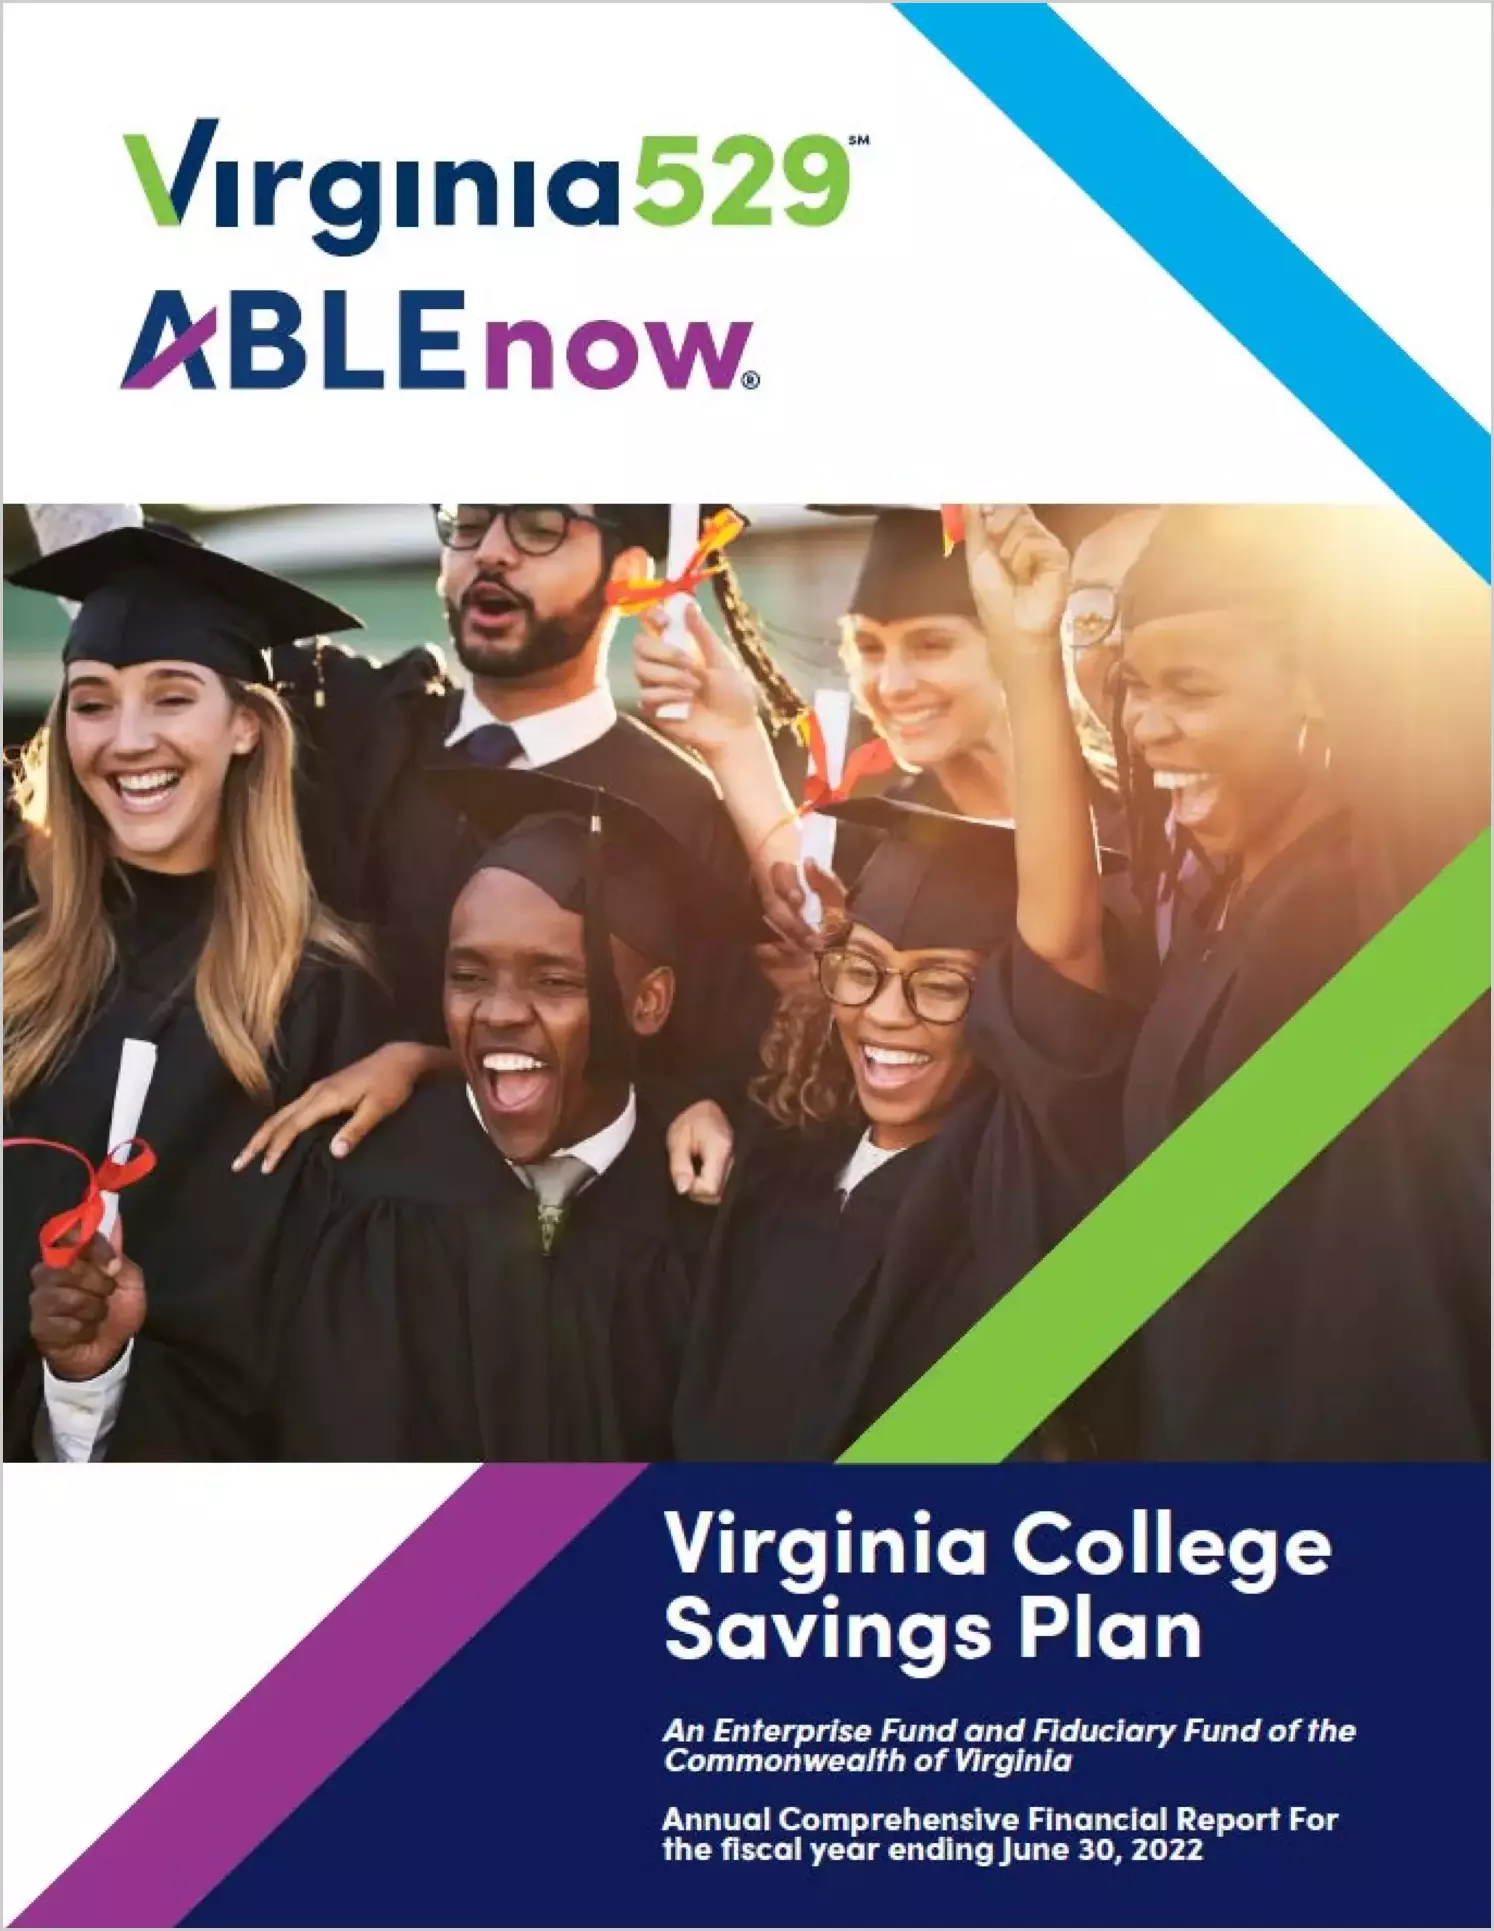 Virginia College Savings Plan Financial Statements & Internal Control Report for the year ended June 30, 2022